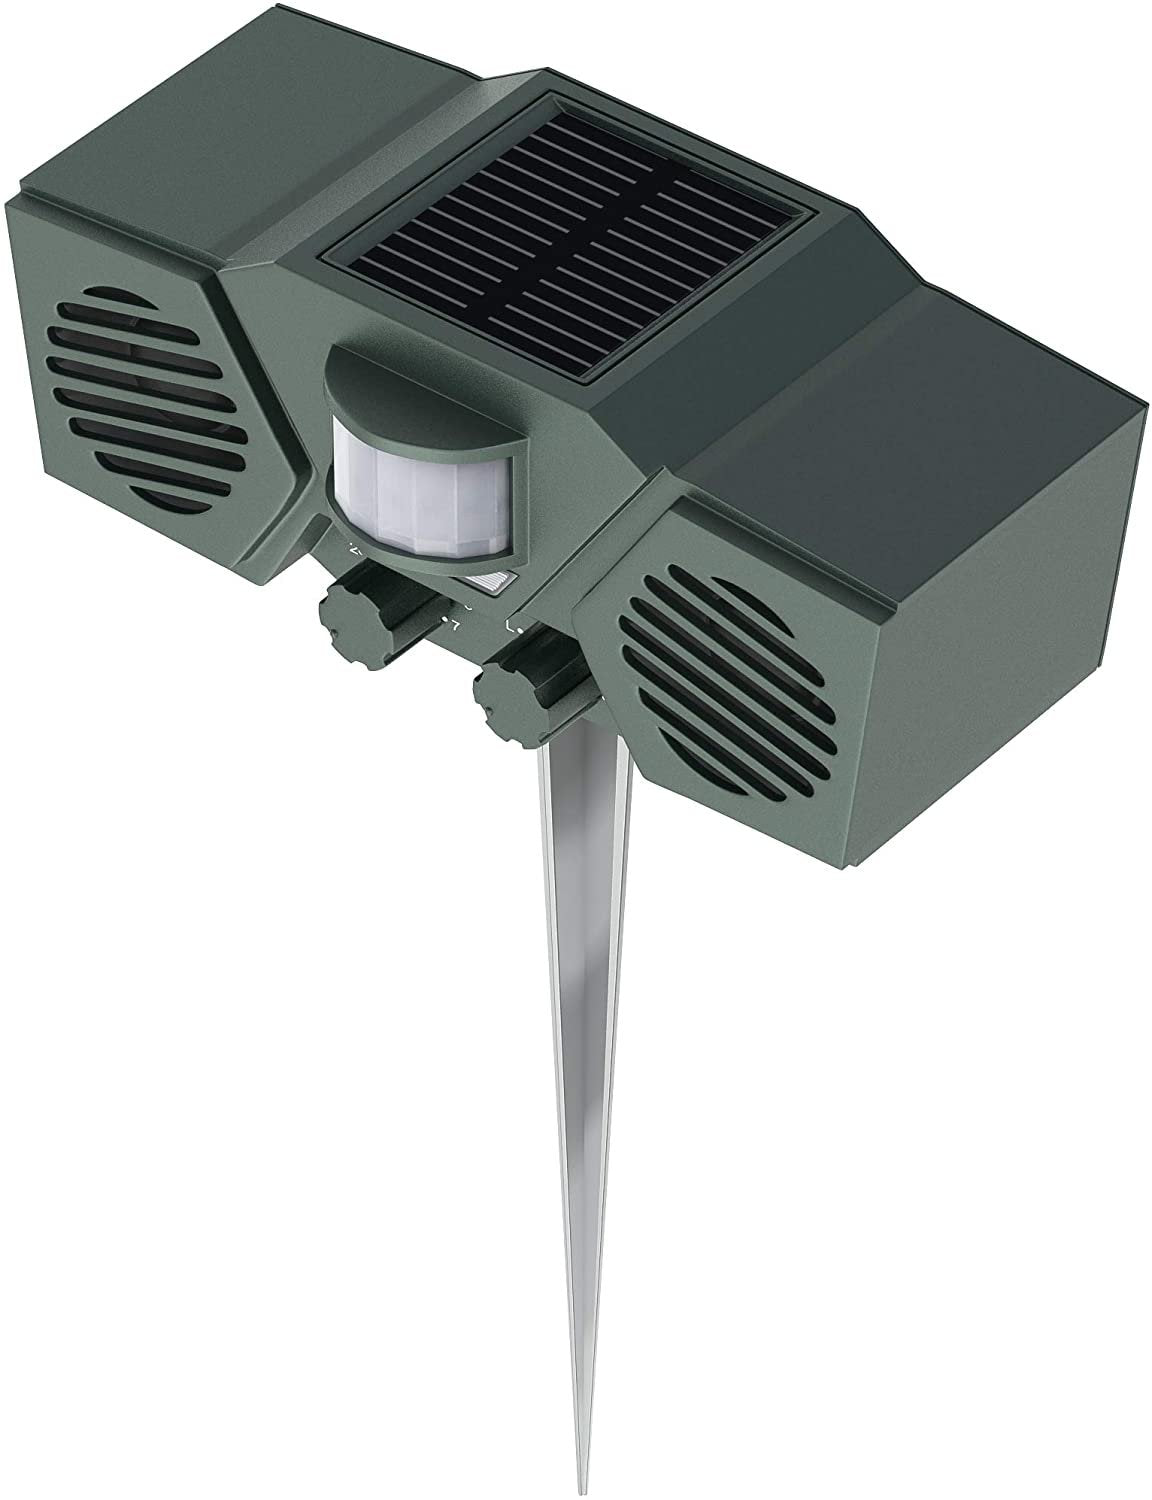 Ultimate Outdoor Pest Repeller | Solar Powered Motion Activated | Green |  Free Shipping & Returns